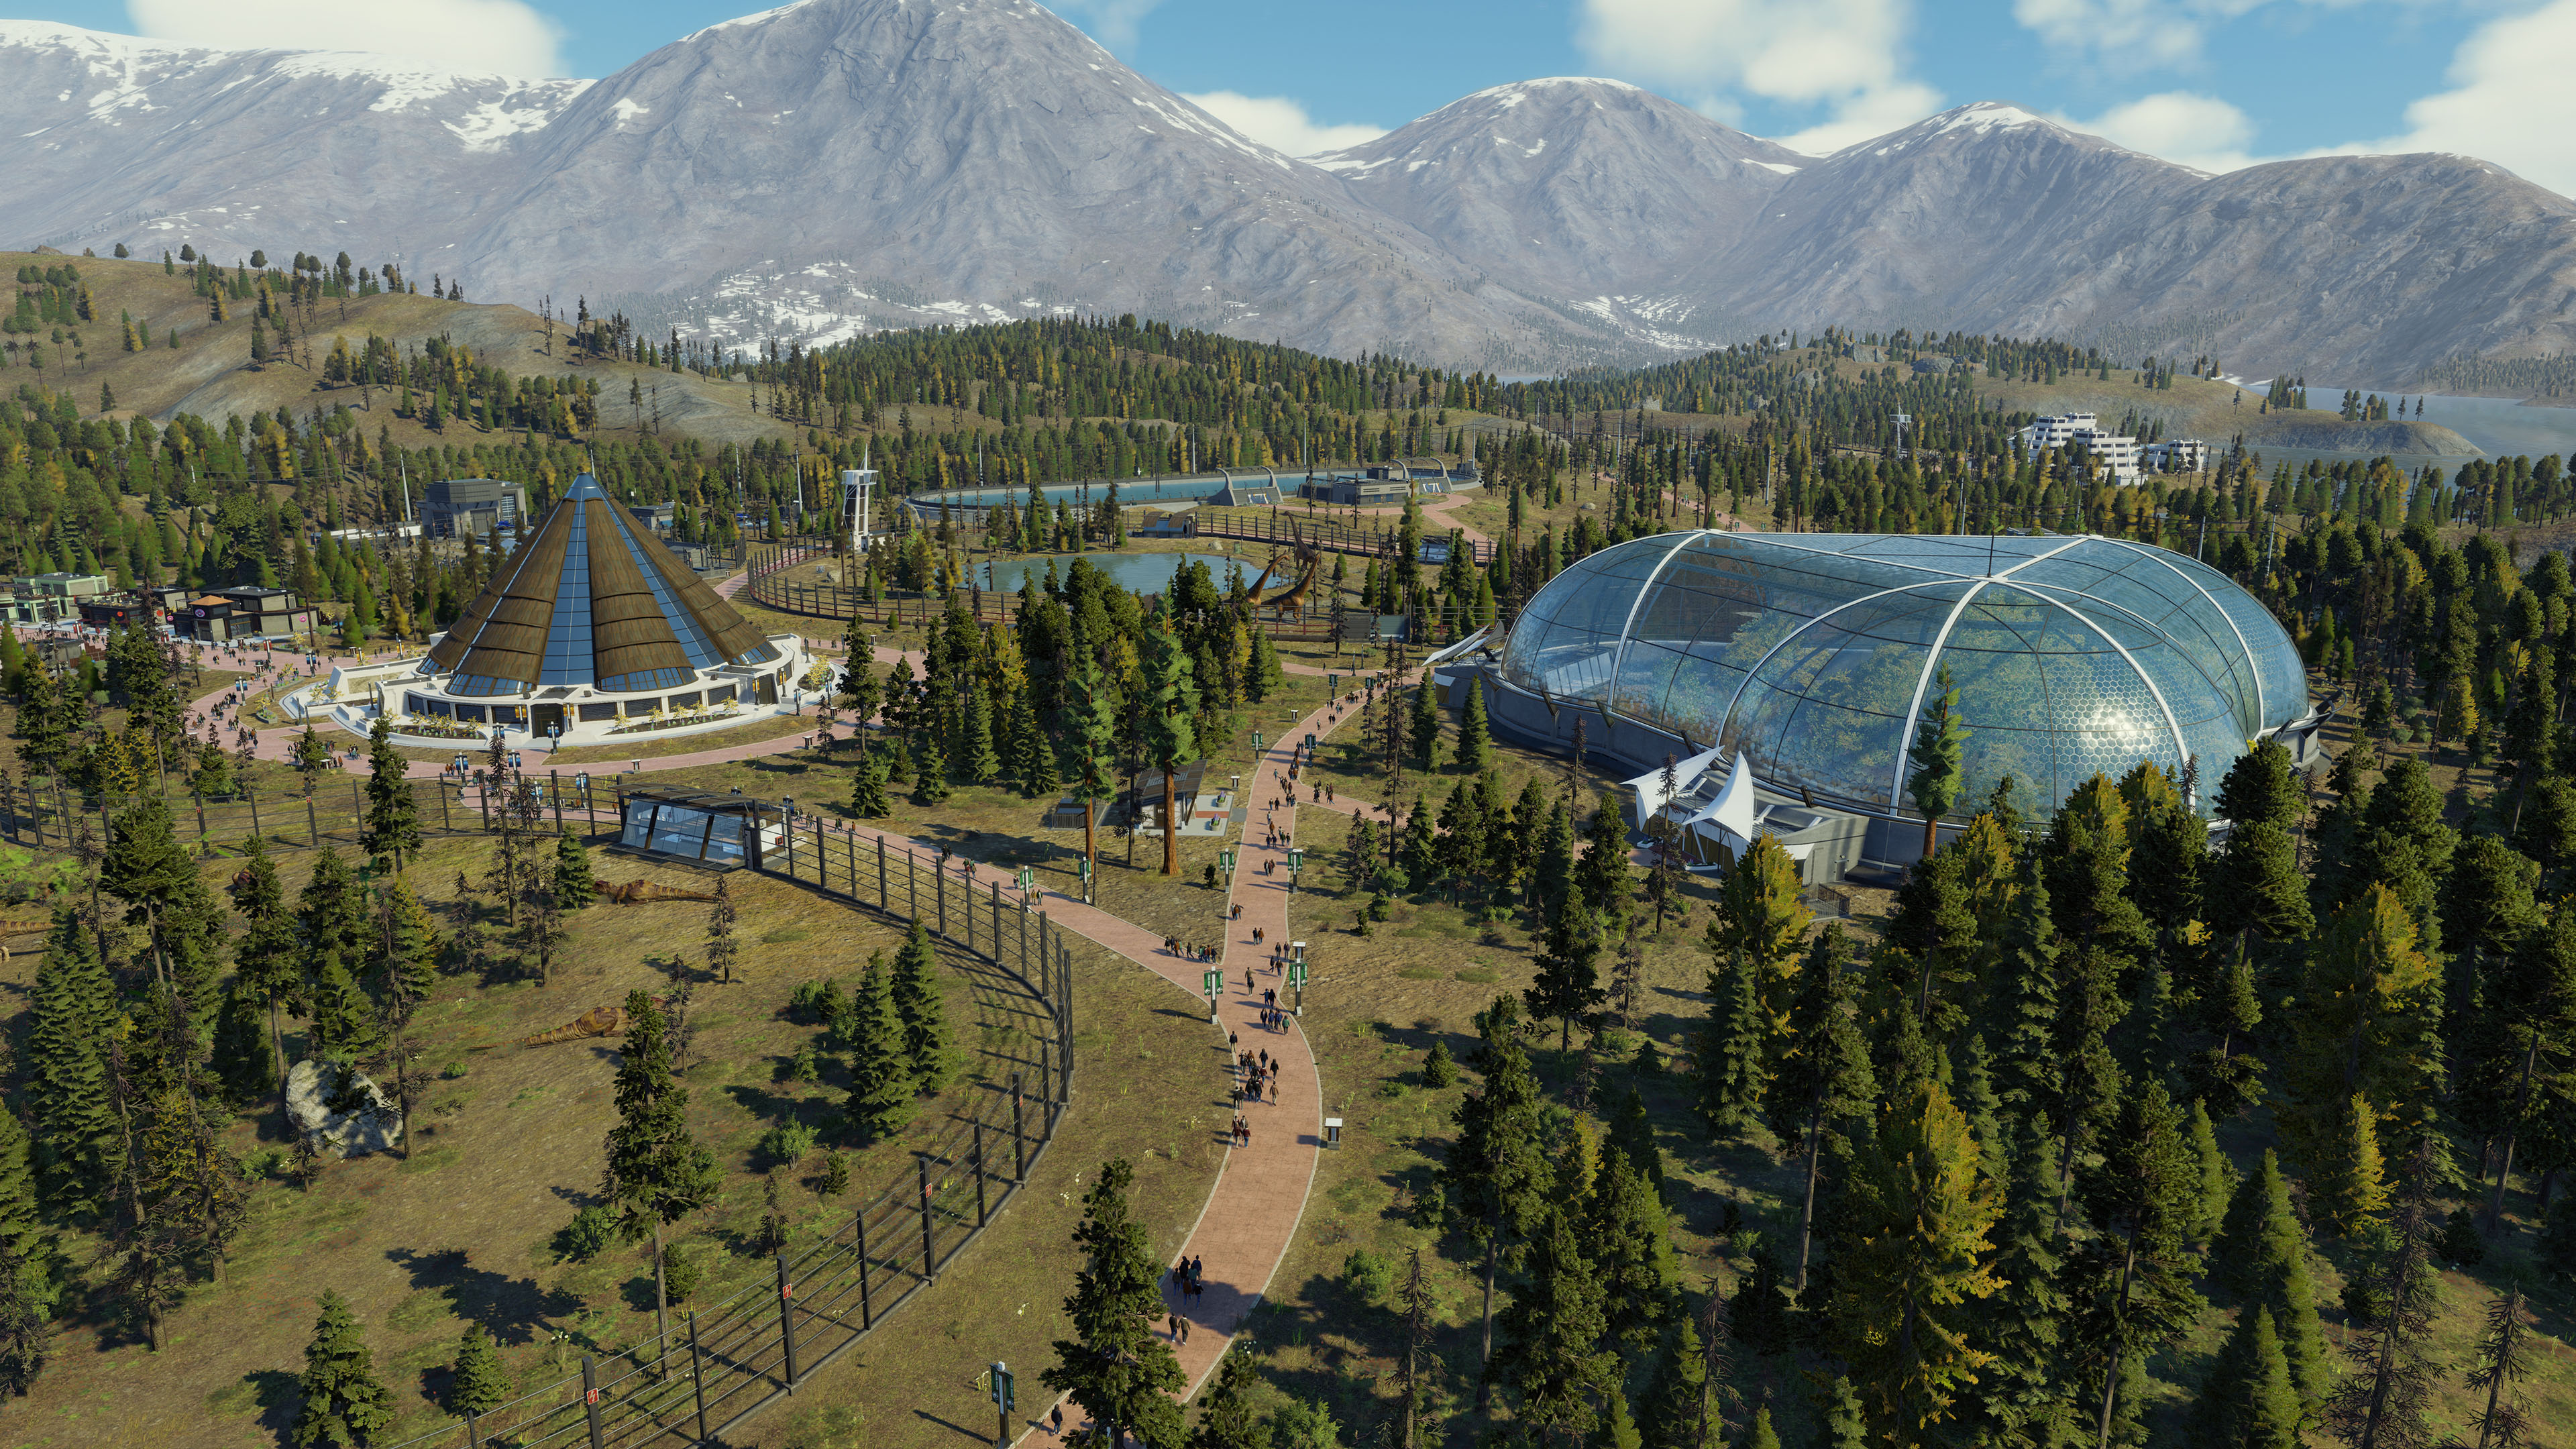 A screenshot of the dinosaur park with several buildings surrounded by trees